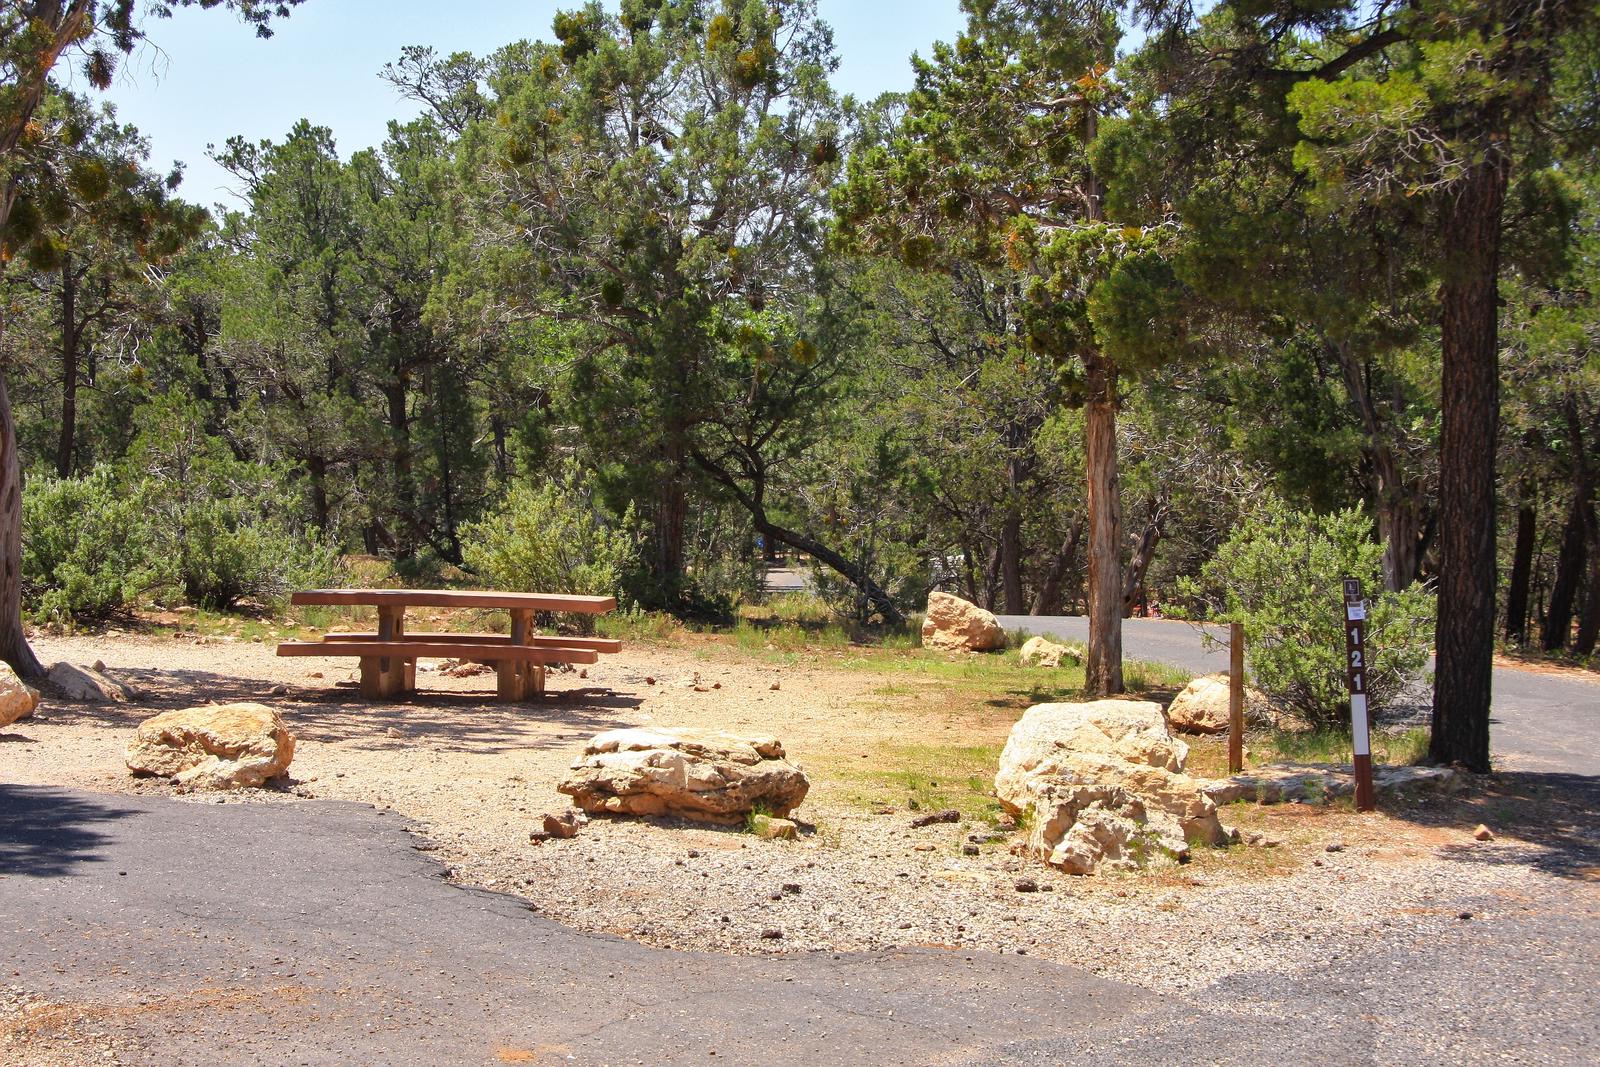 Picnic table, fire pit, and parking spot, Mather CampgroundPicnic table, fire pit, and parking spot for Juniper Loop 121, Mather Campground